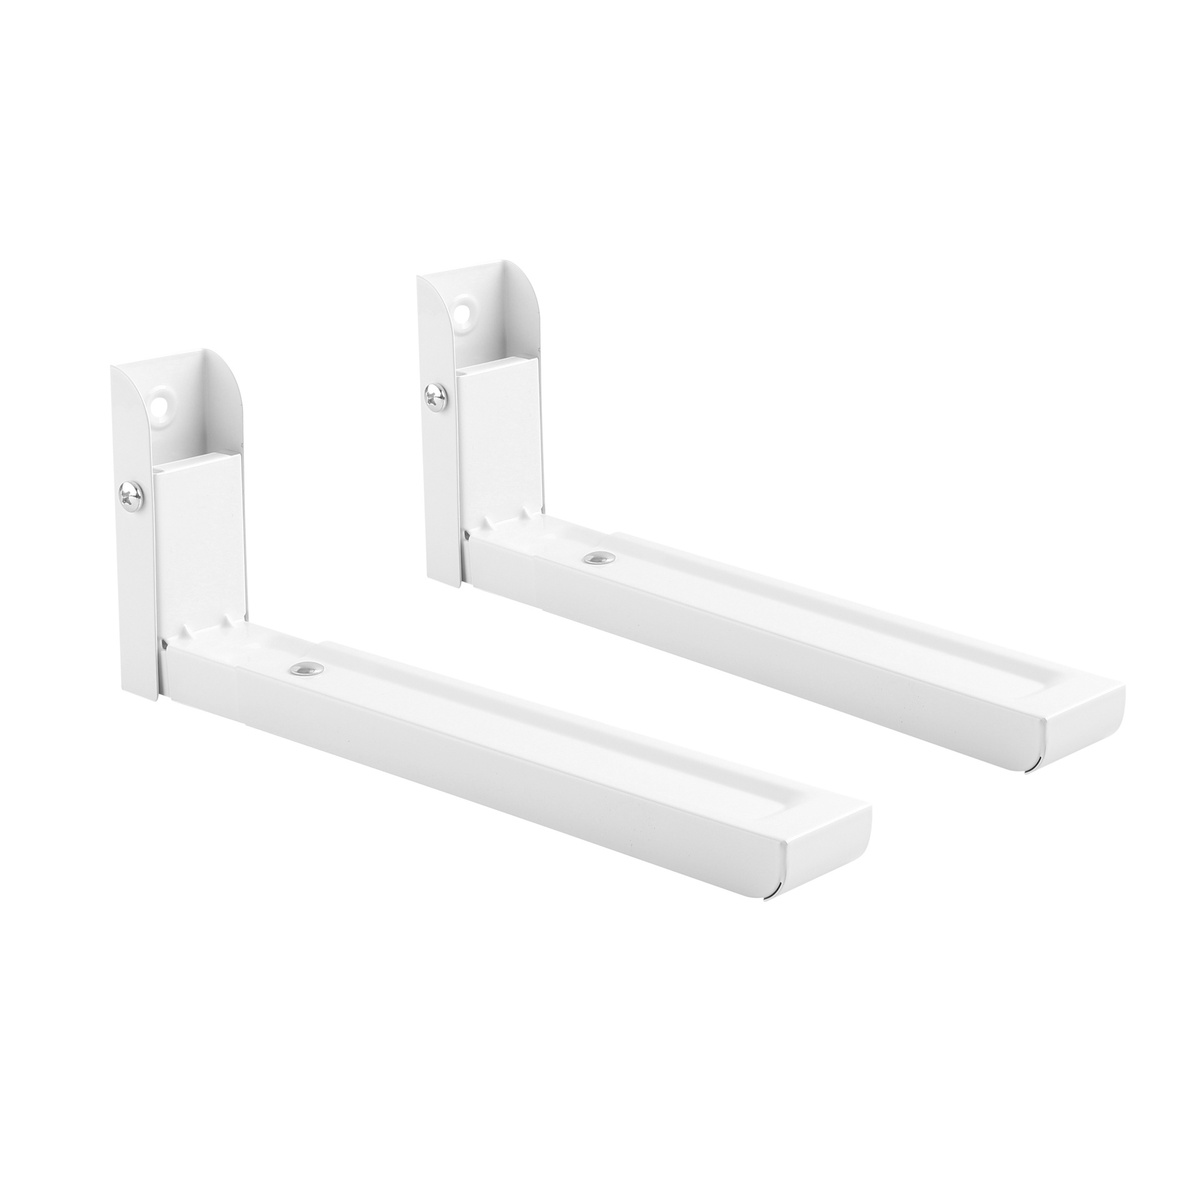 Foldable microwave wall mount